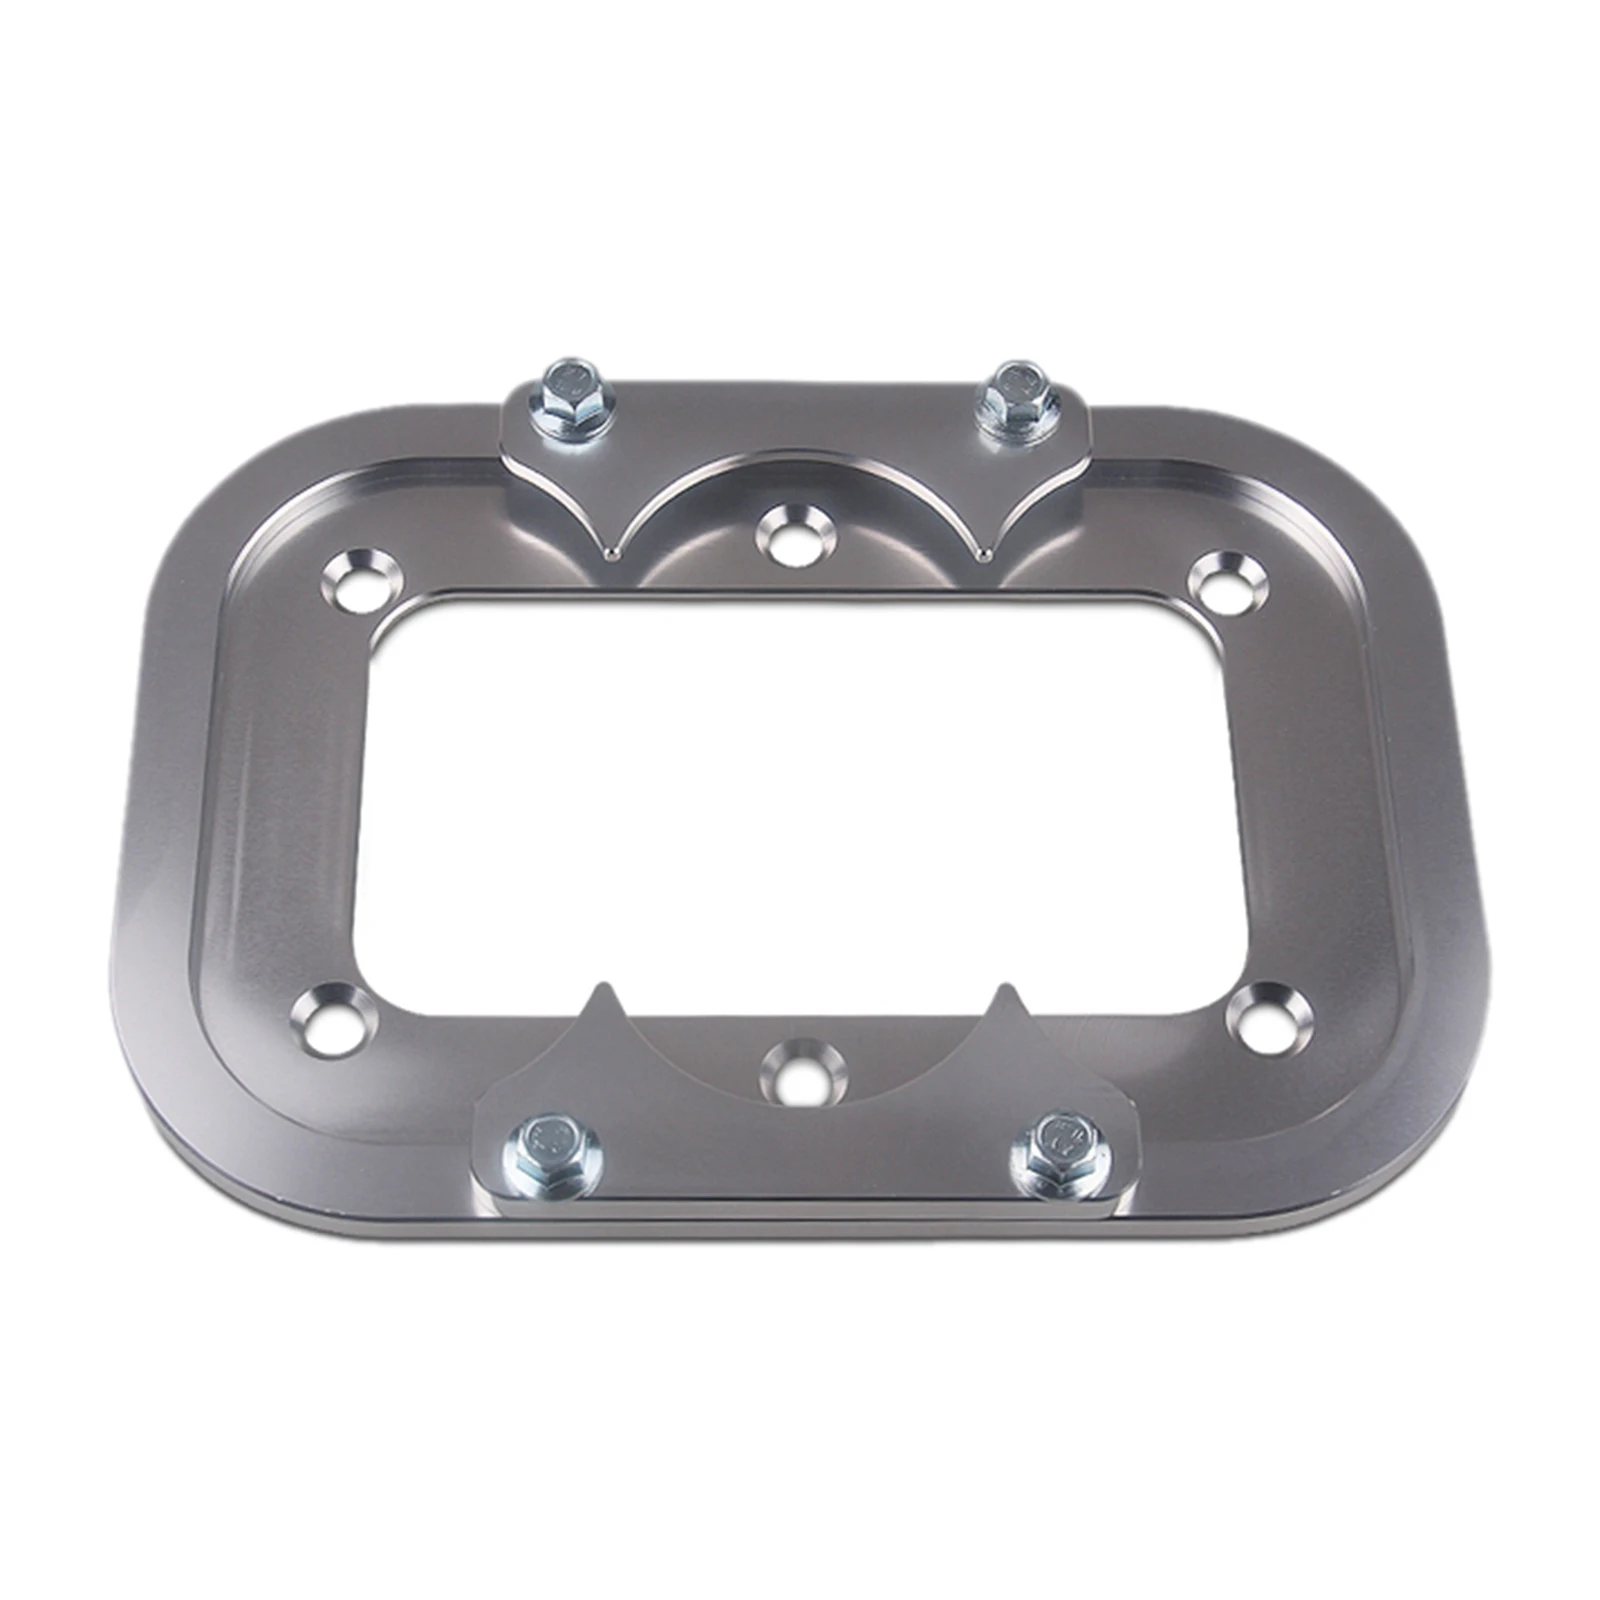 Billet Aluminum Battery Relocation Tray Bracket Hold Down Mount for Optima Red Yellow Blue Top 34 34/78 D34/78 D34